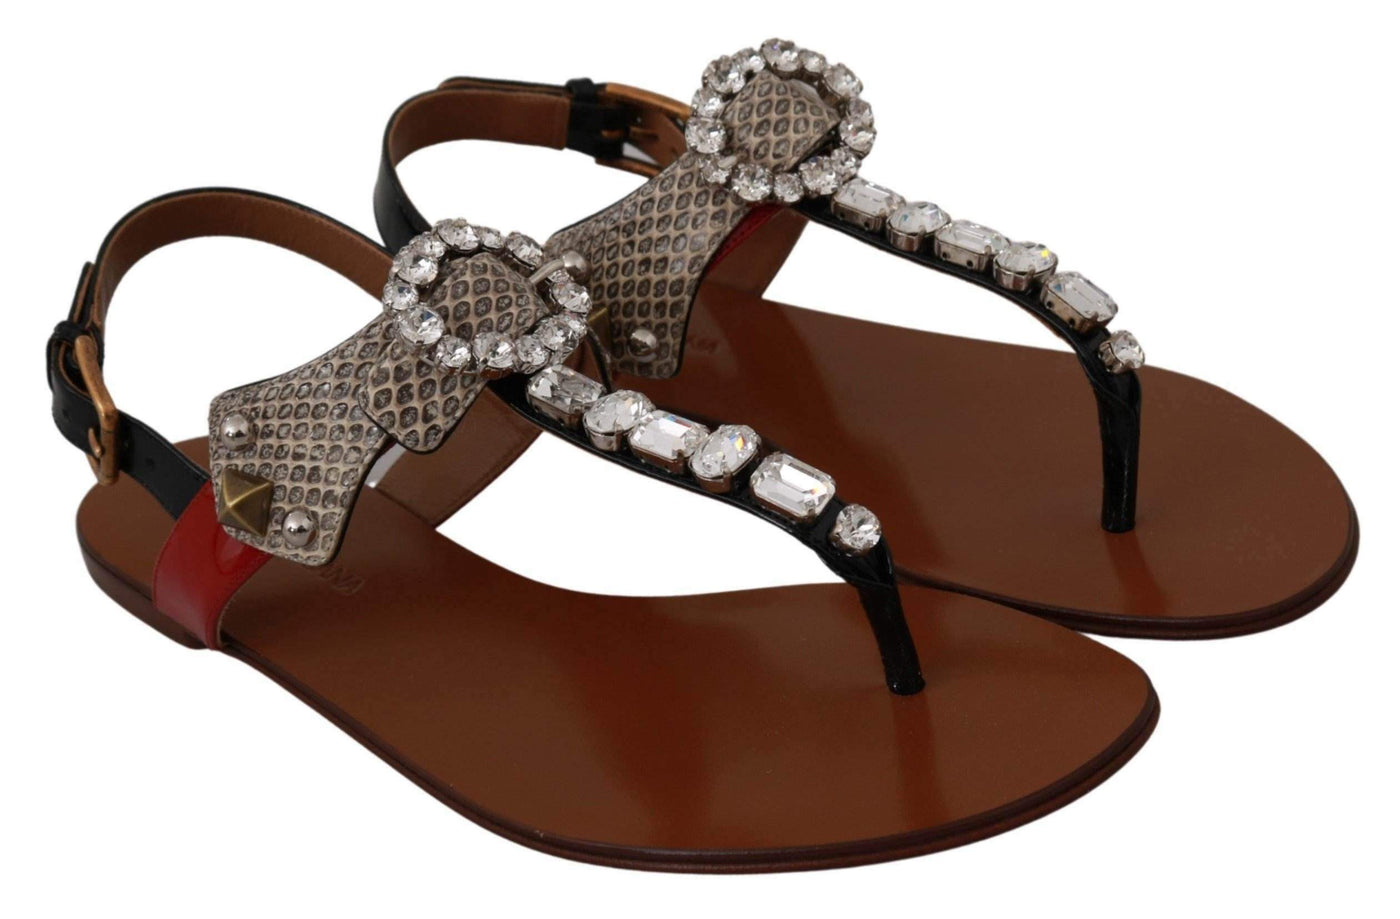 Dolce & Gabbana  Leather Ayers Crystal Sandals Flip Flops Shoes #women, Brand_Dolce & Gabbana, Brown, Catch, Category_Shoes, Dolce & Gabbana, EU35/US4.5, EU36/US5.5, EU39.5/US9, EU40.5/US10, feed-agegroup-adult, feed-color-brown, feed-gender-female, feed-size-US4.5, feed-size-US5.5, Flat Shoes - Women - Shoes, Gender_Women, Kogan, Shoes - New Arrivals at SEYMAYKA